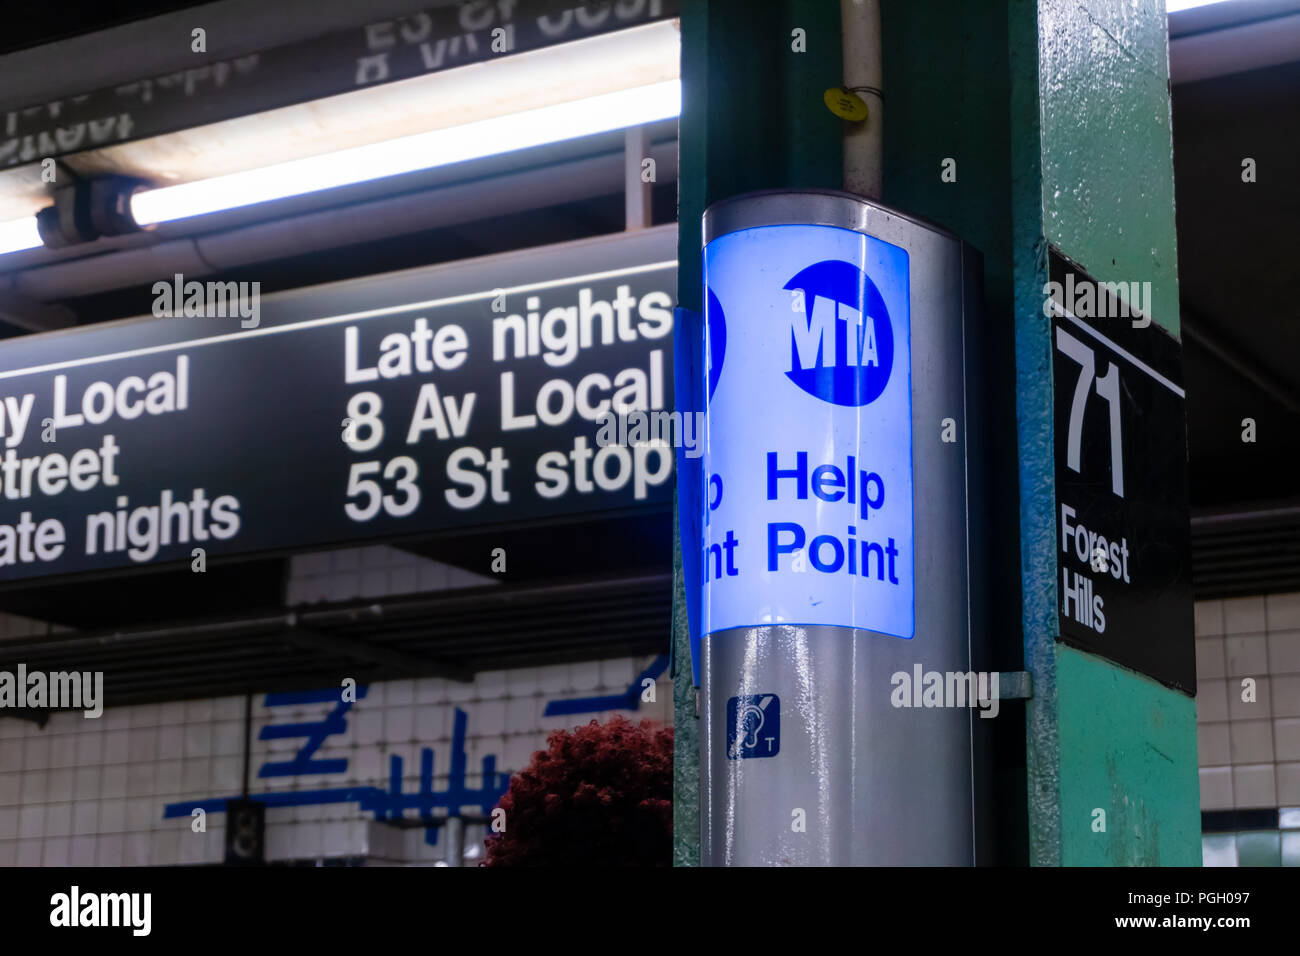 Help point in a subway station in New York City Stock Photo